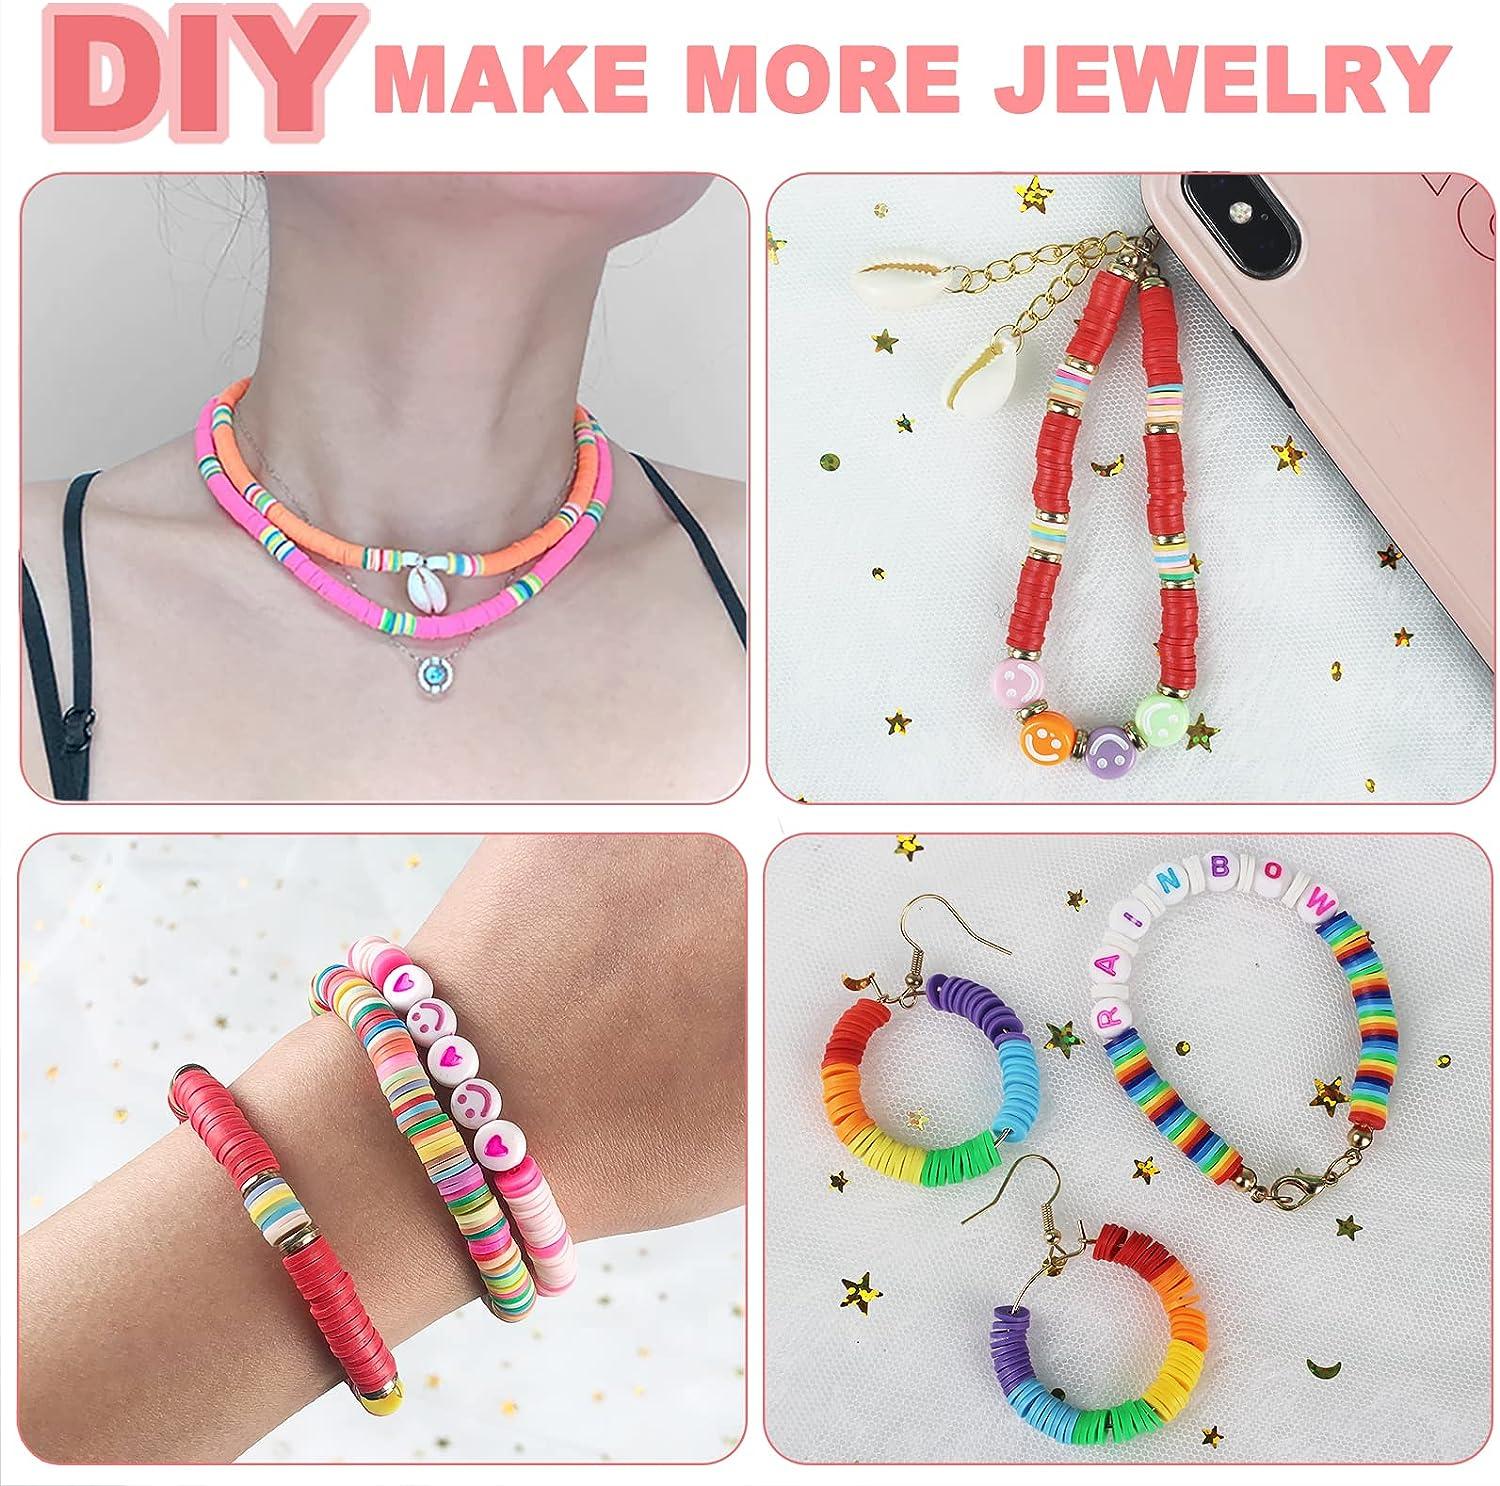 Jewelry Making Kit For Adults & Teens - Girls DIY Bracelet Making Kit,  Friendship Bracelet Kit w/Beads, Chains, Tools